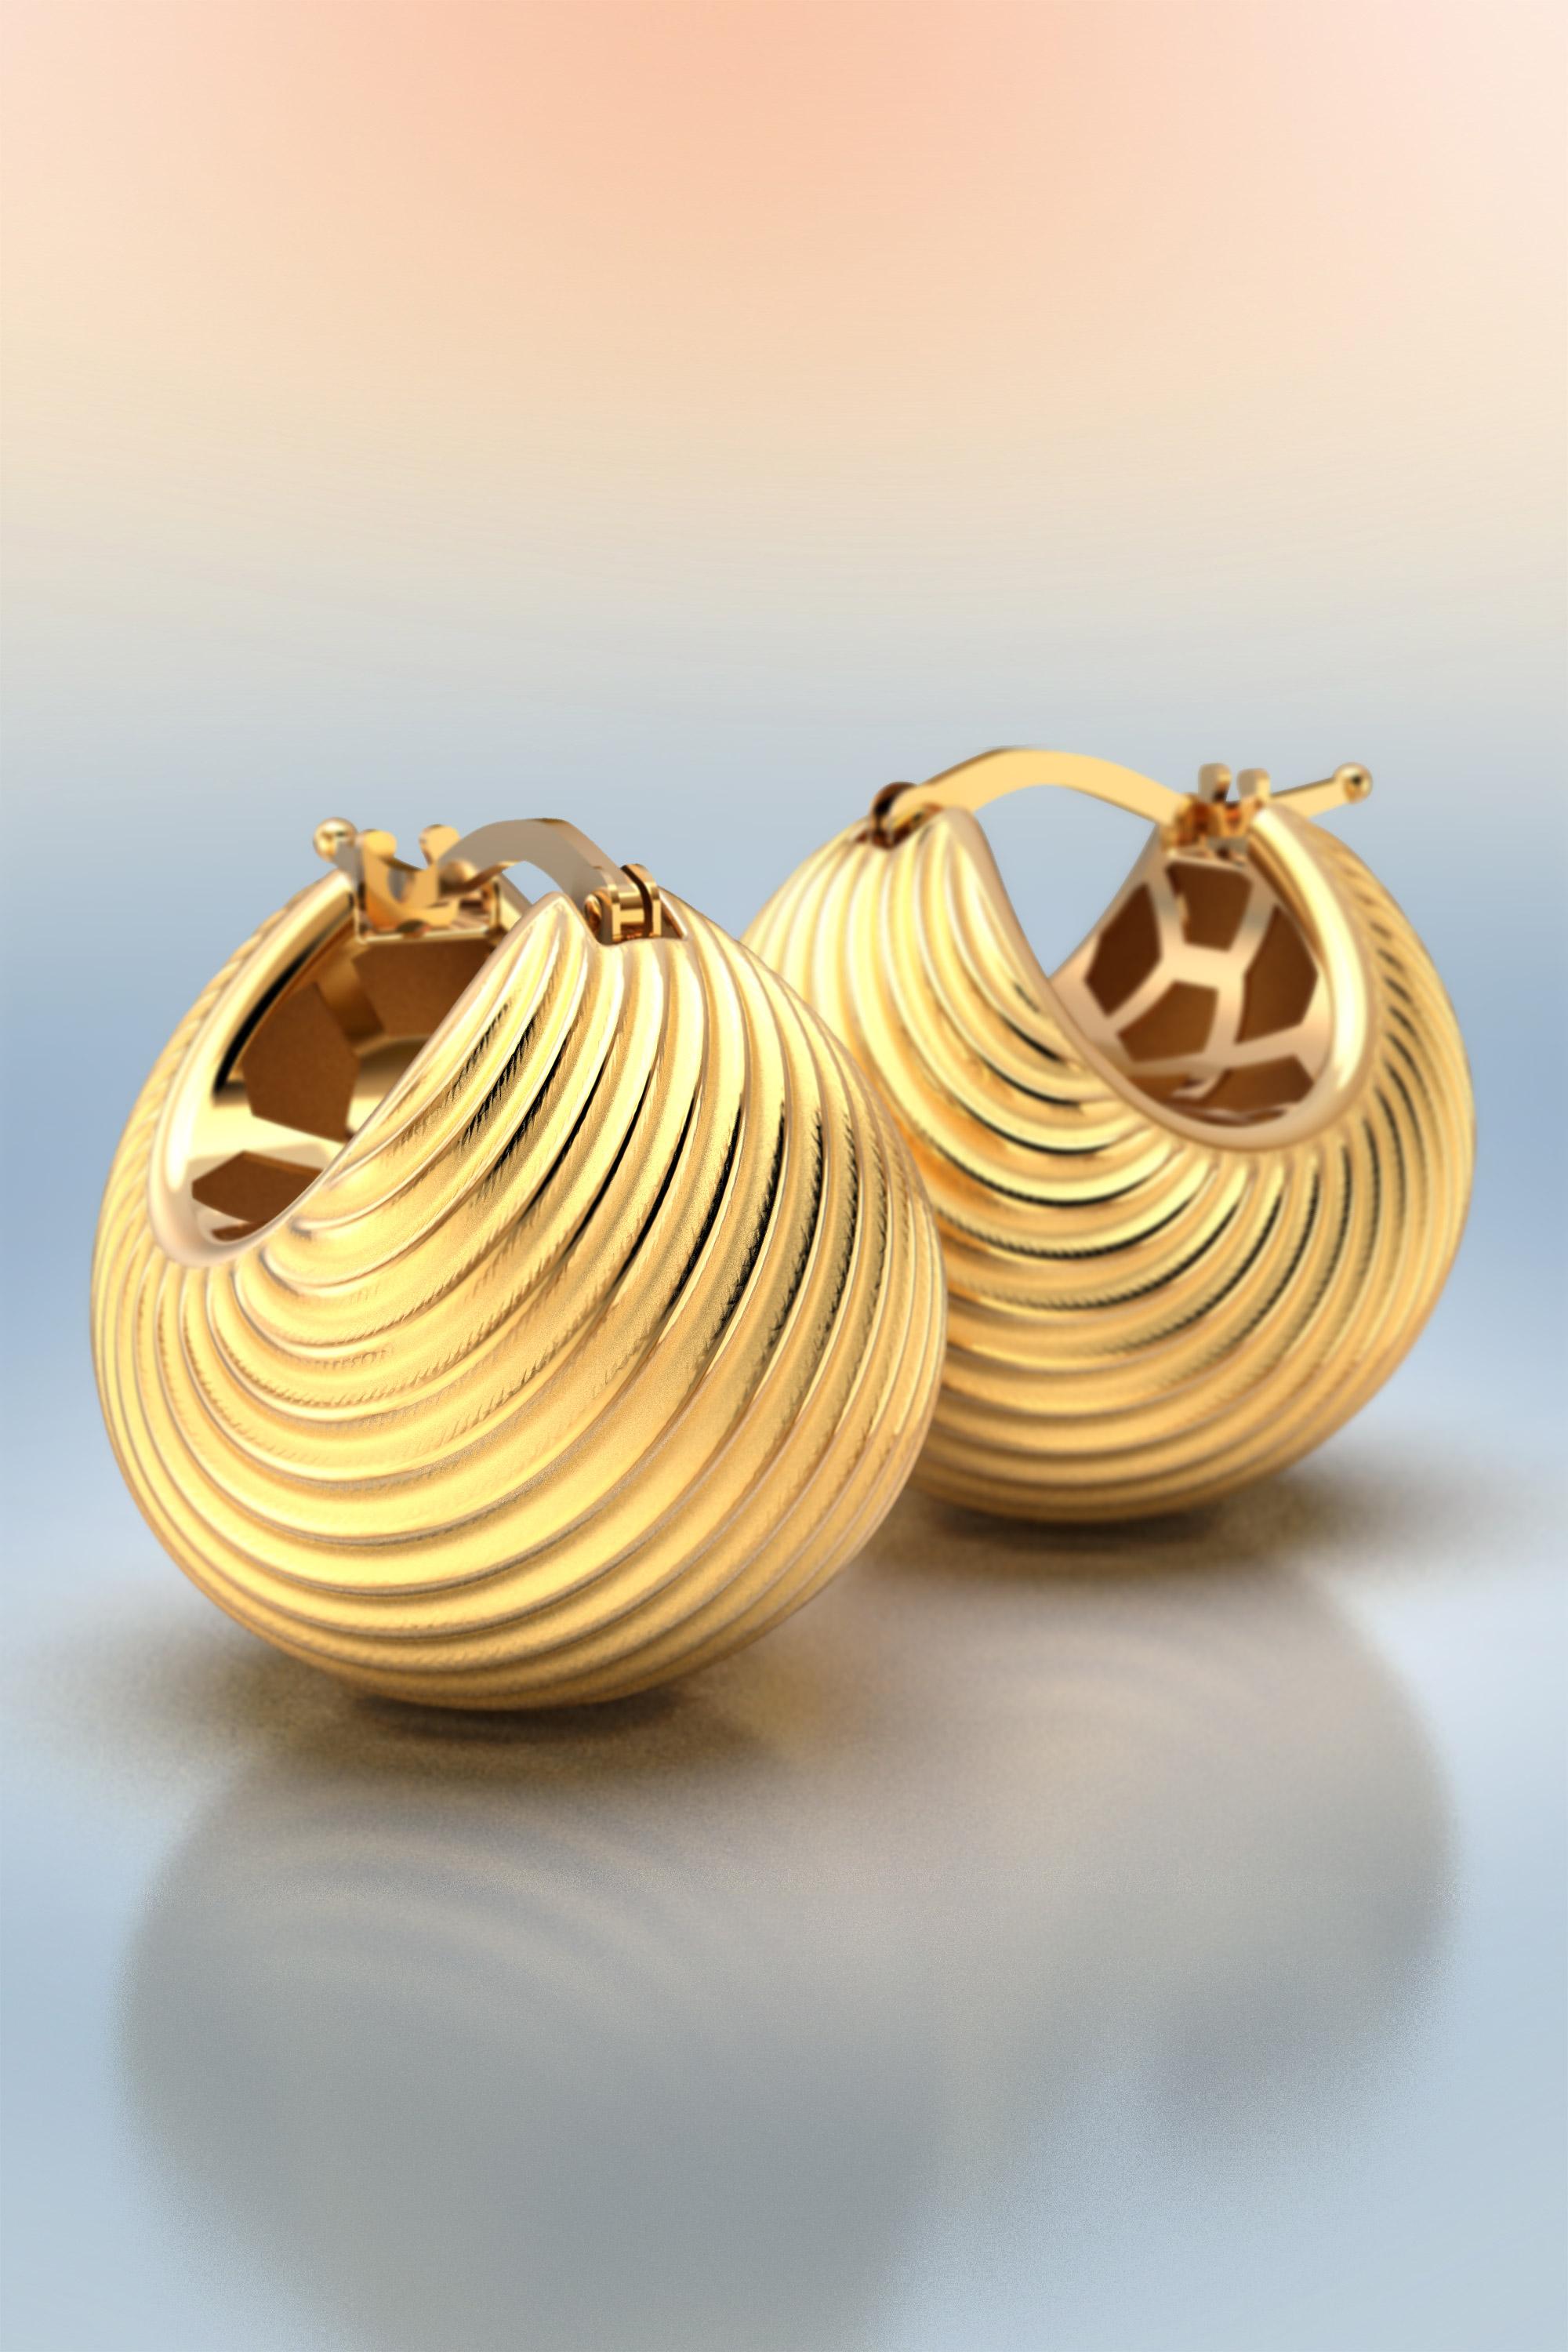 Contemporary Oltremare Gioielli 18 Karat Yellow Gold Hoop Earrings Made in Italy For Sale